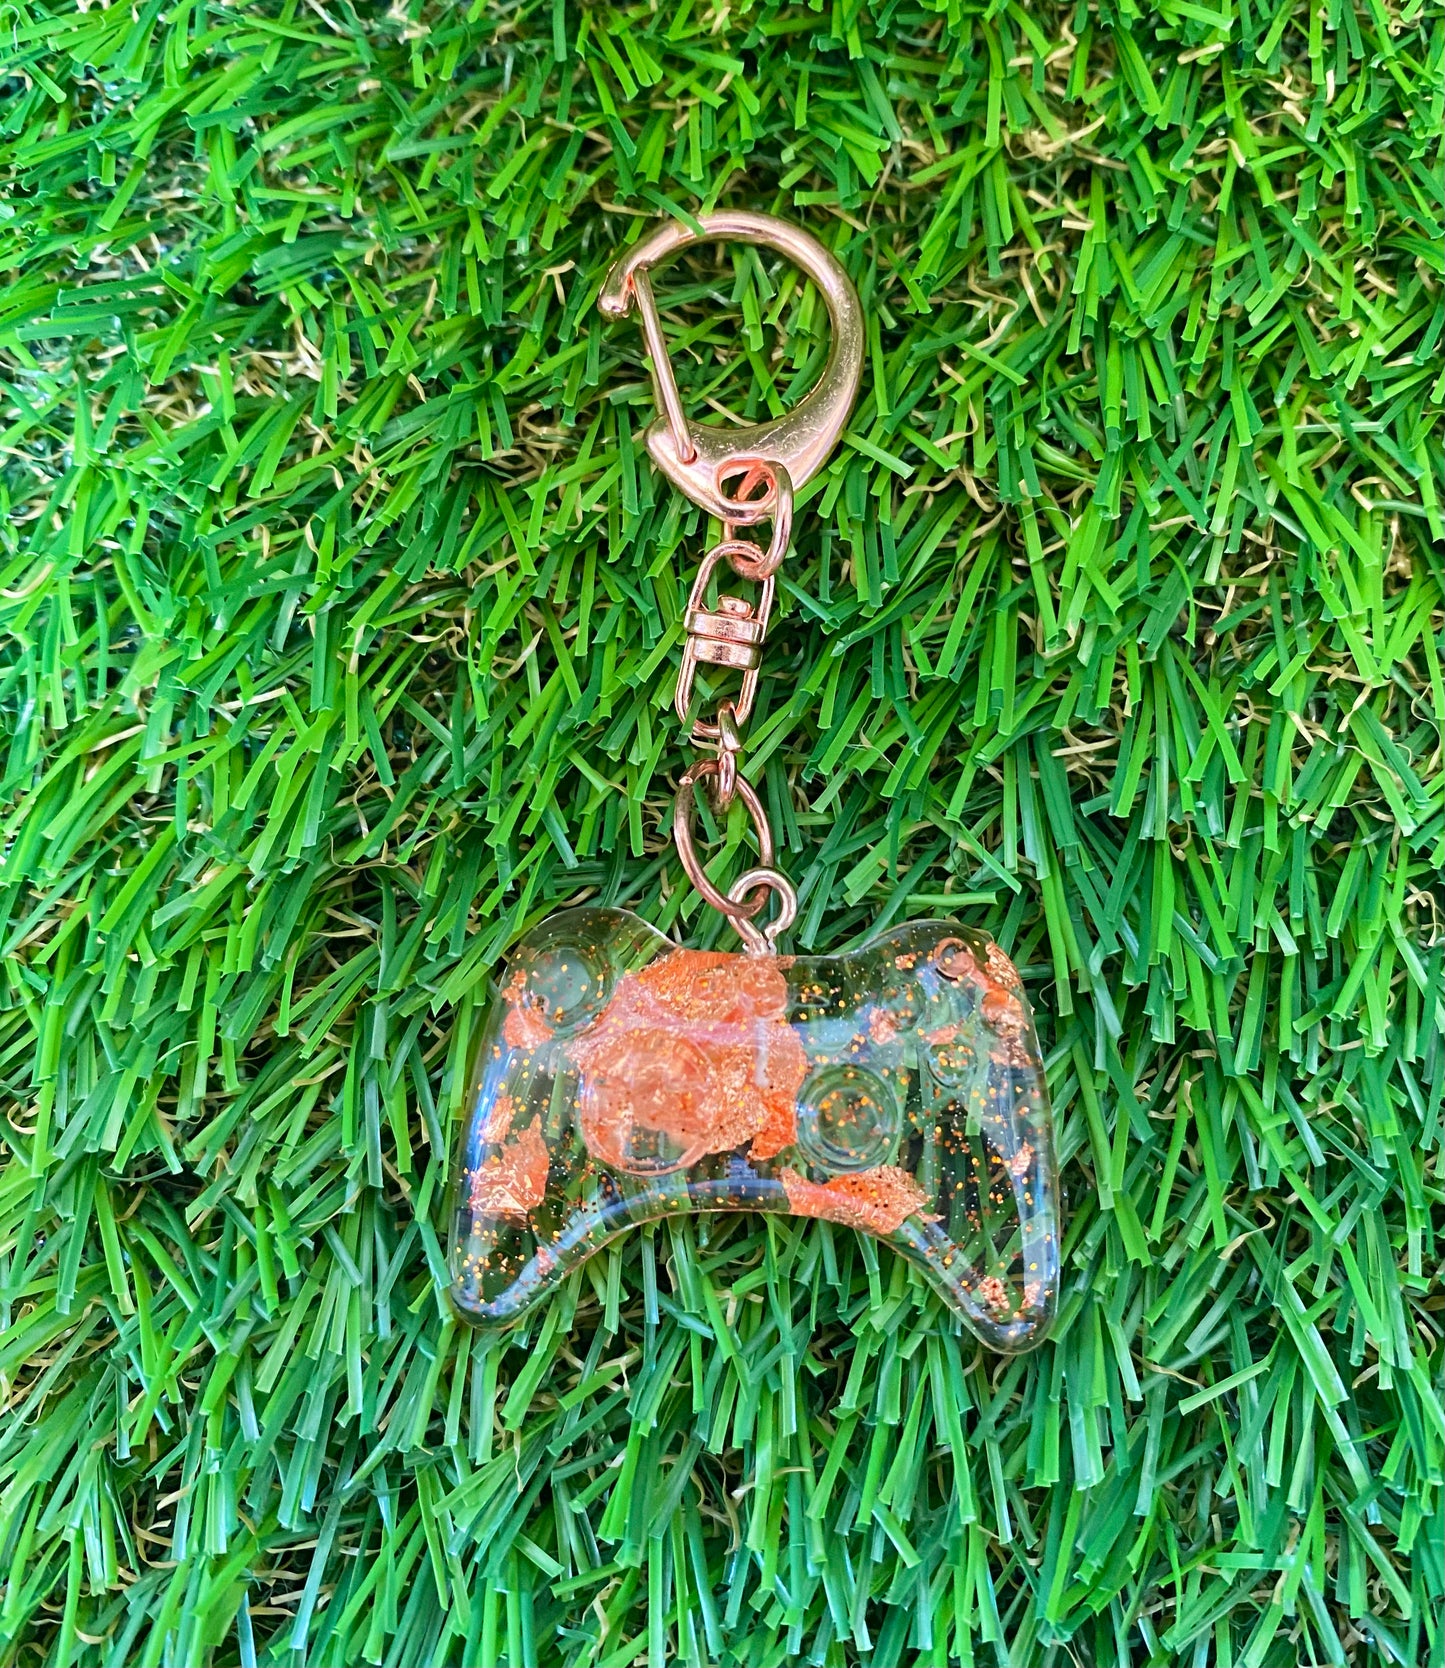 Rose Gold Gaming Keychain